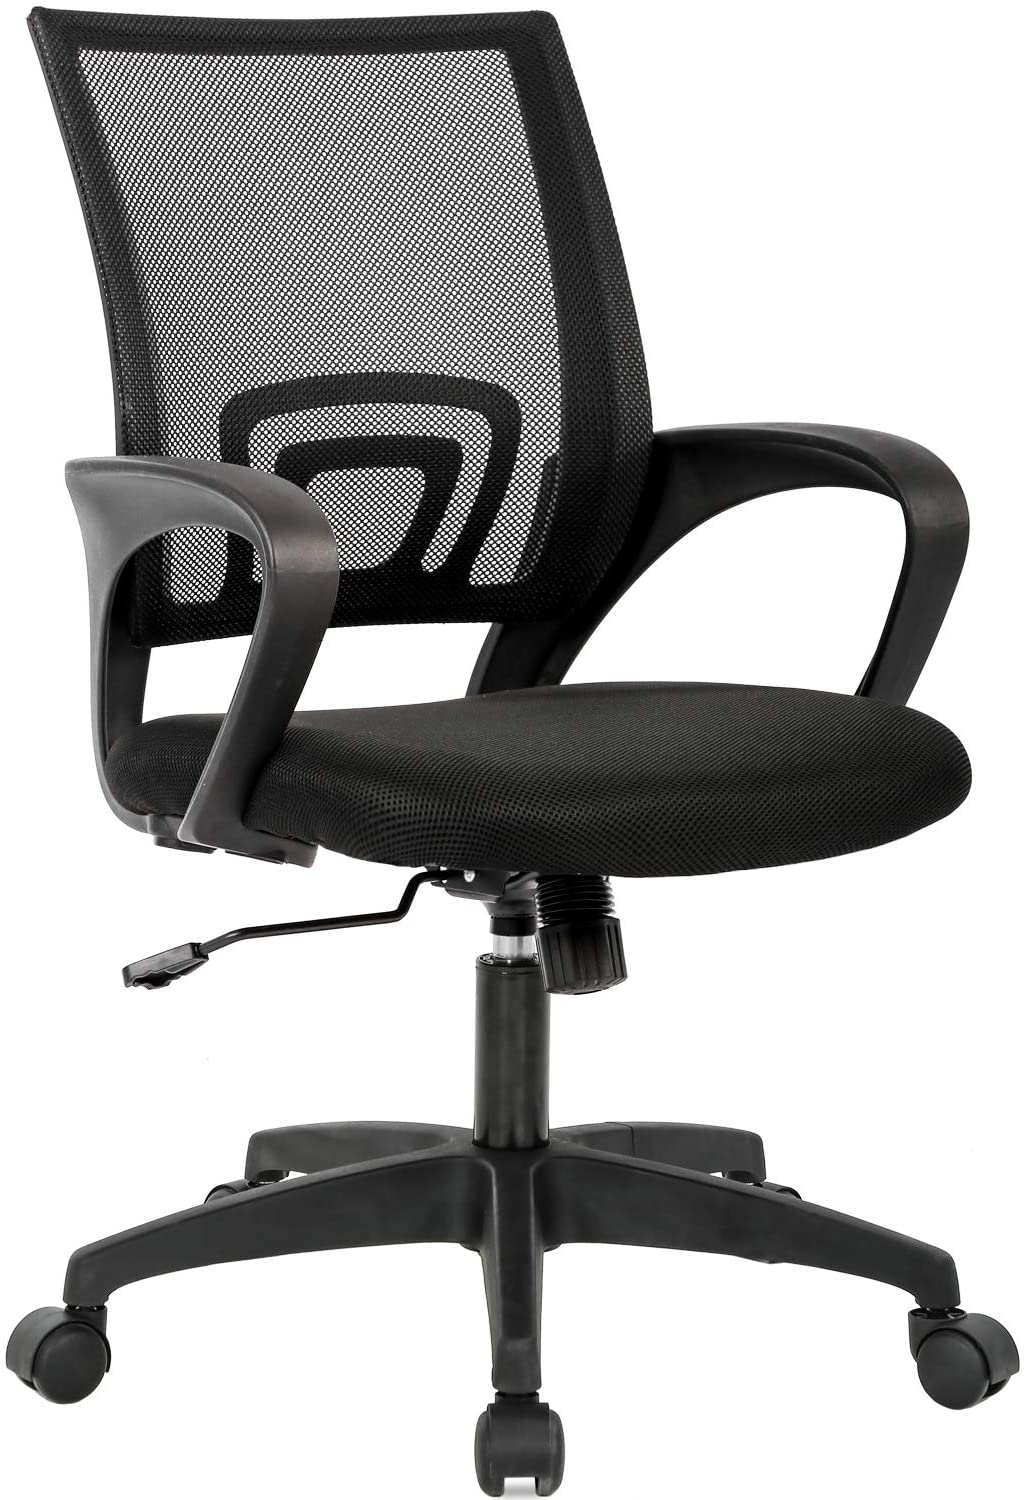 TEAL® Leo MB Mesh Mid-Back Ergonomic Office Chair/Study Chair/Revolving  Chair/Computer Chair